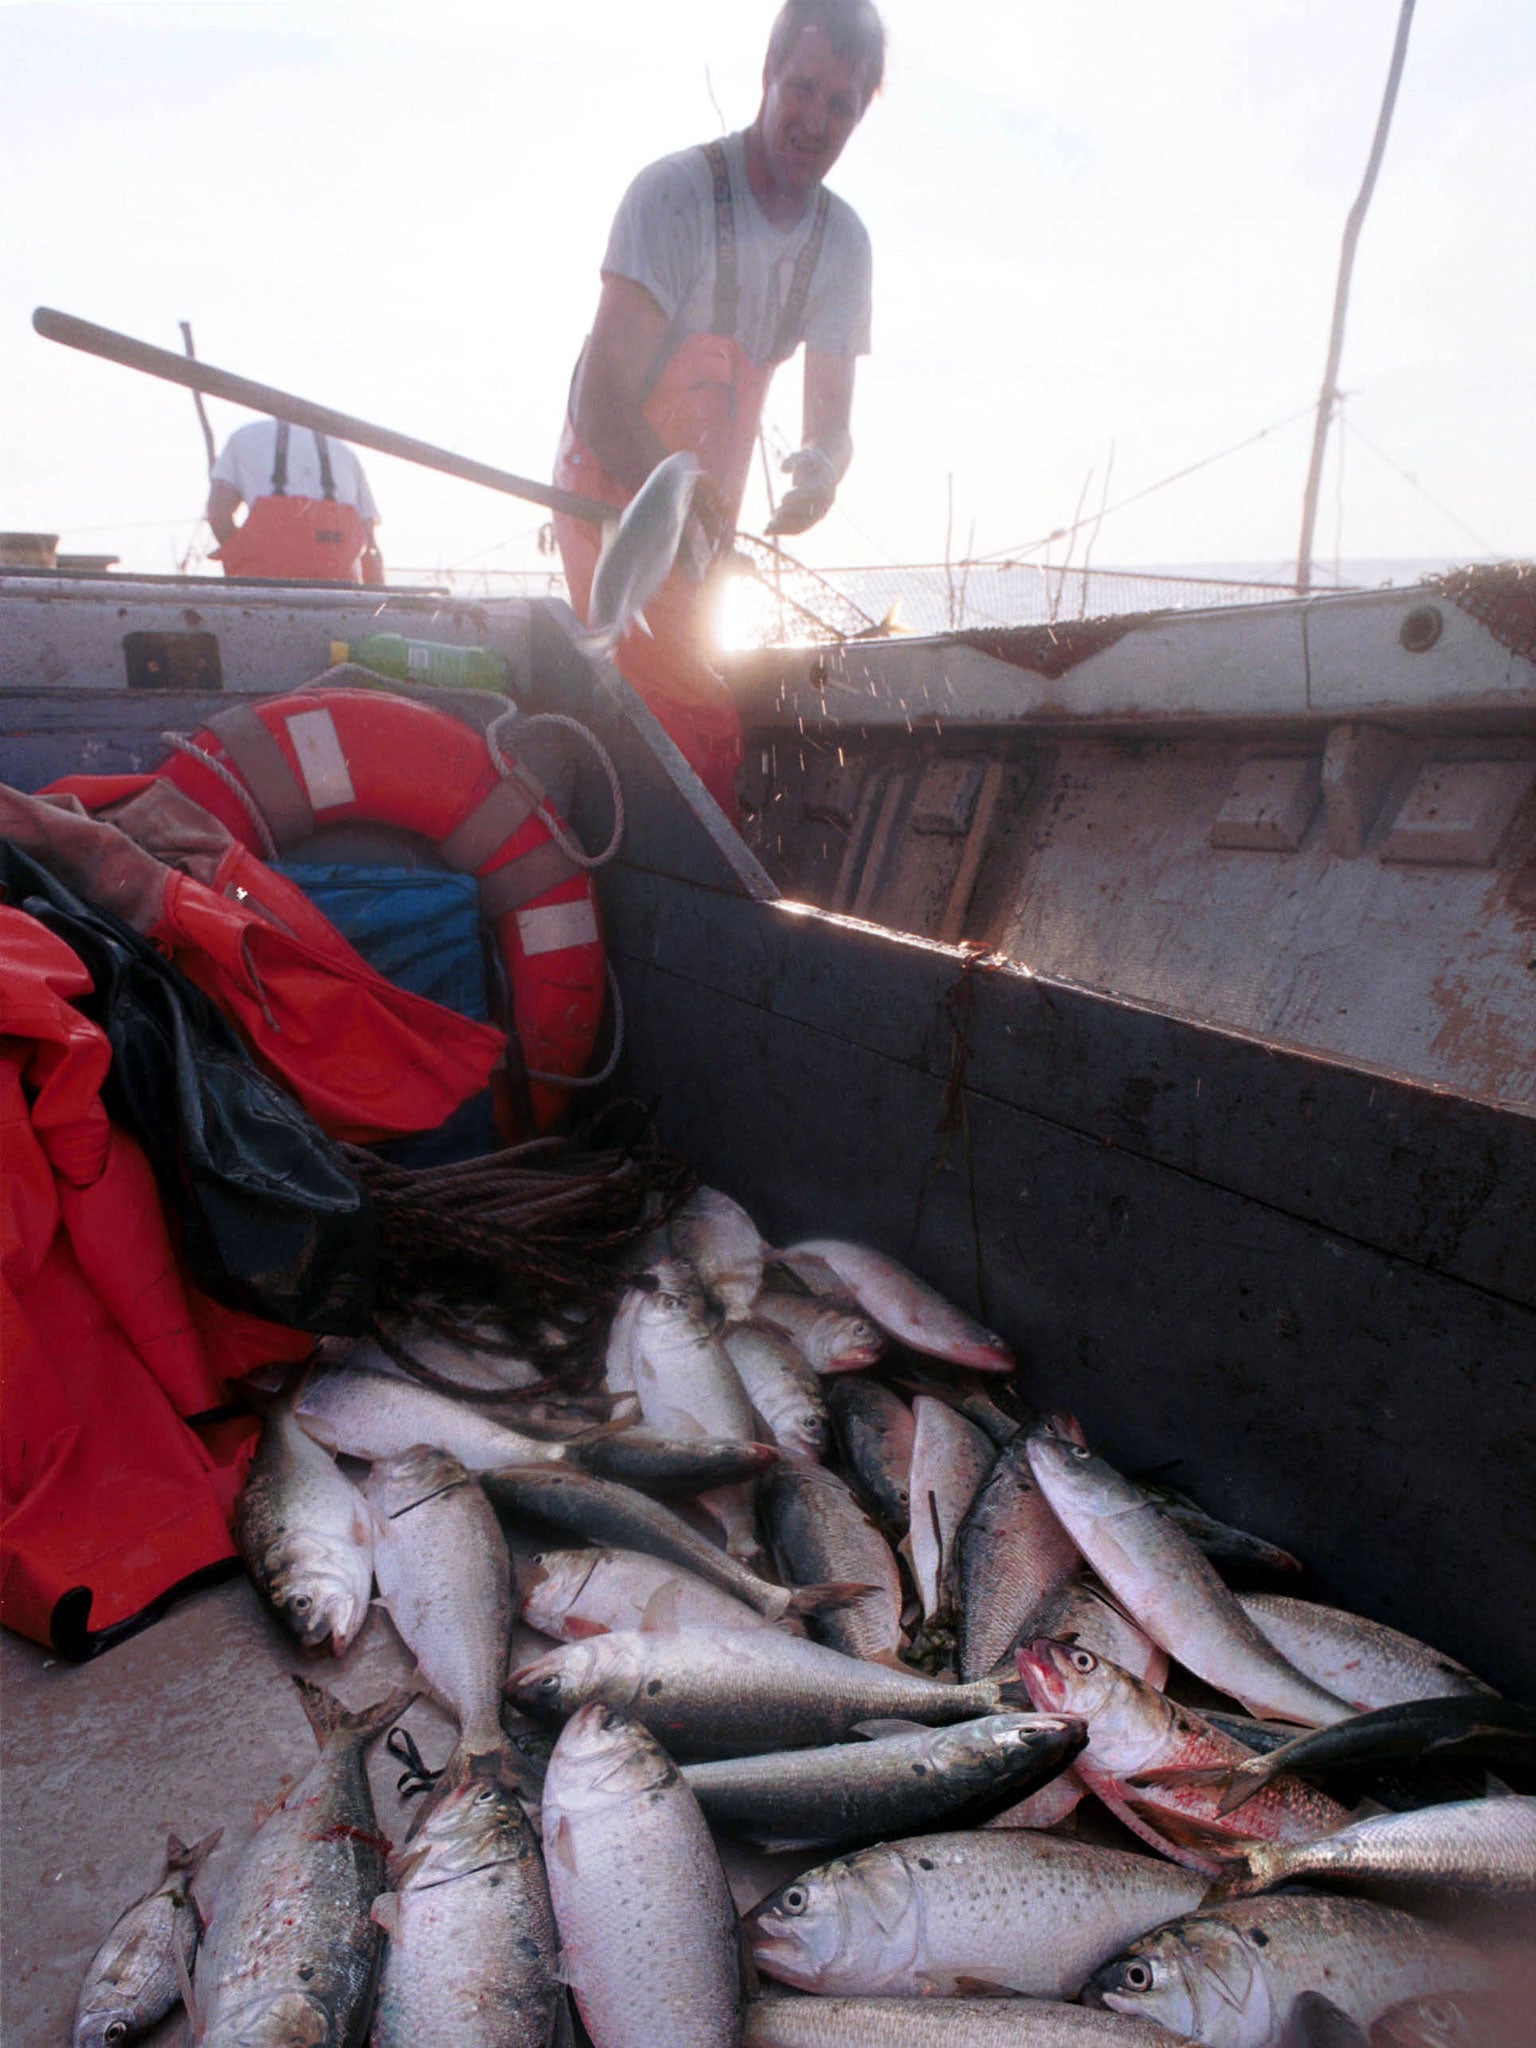 Depleted stocks have cast the Cape Cod fishing industry into crisis